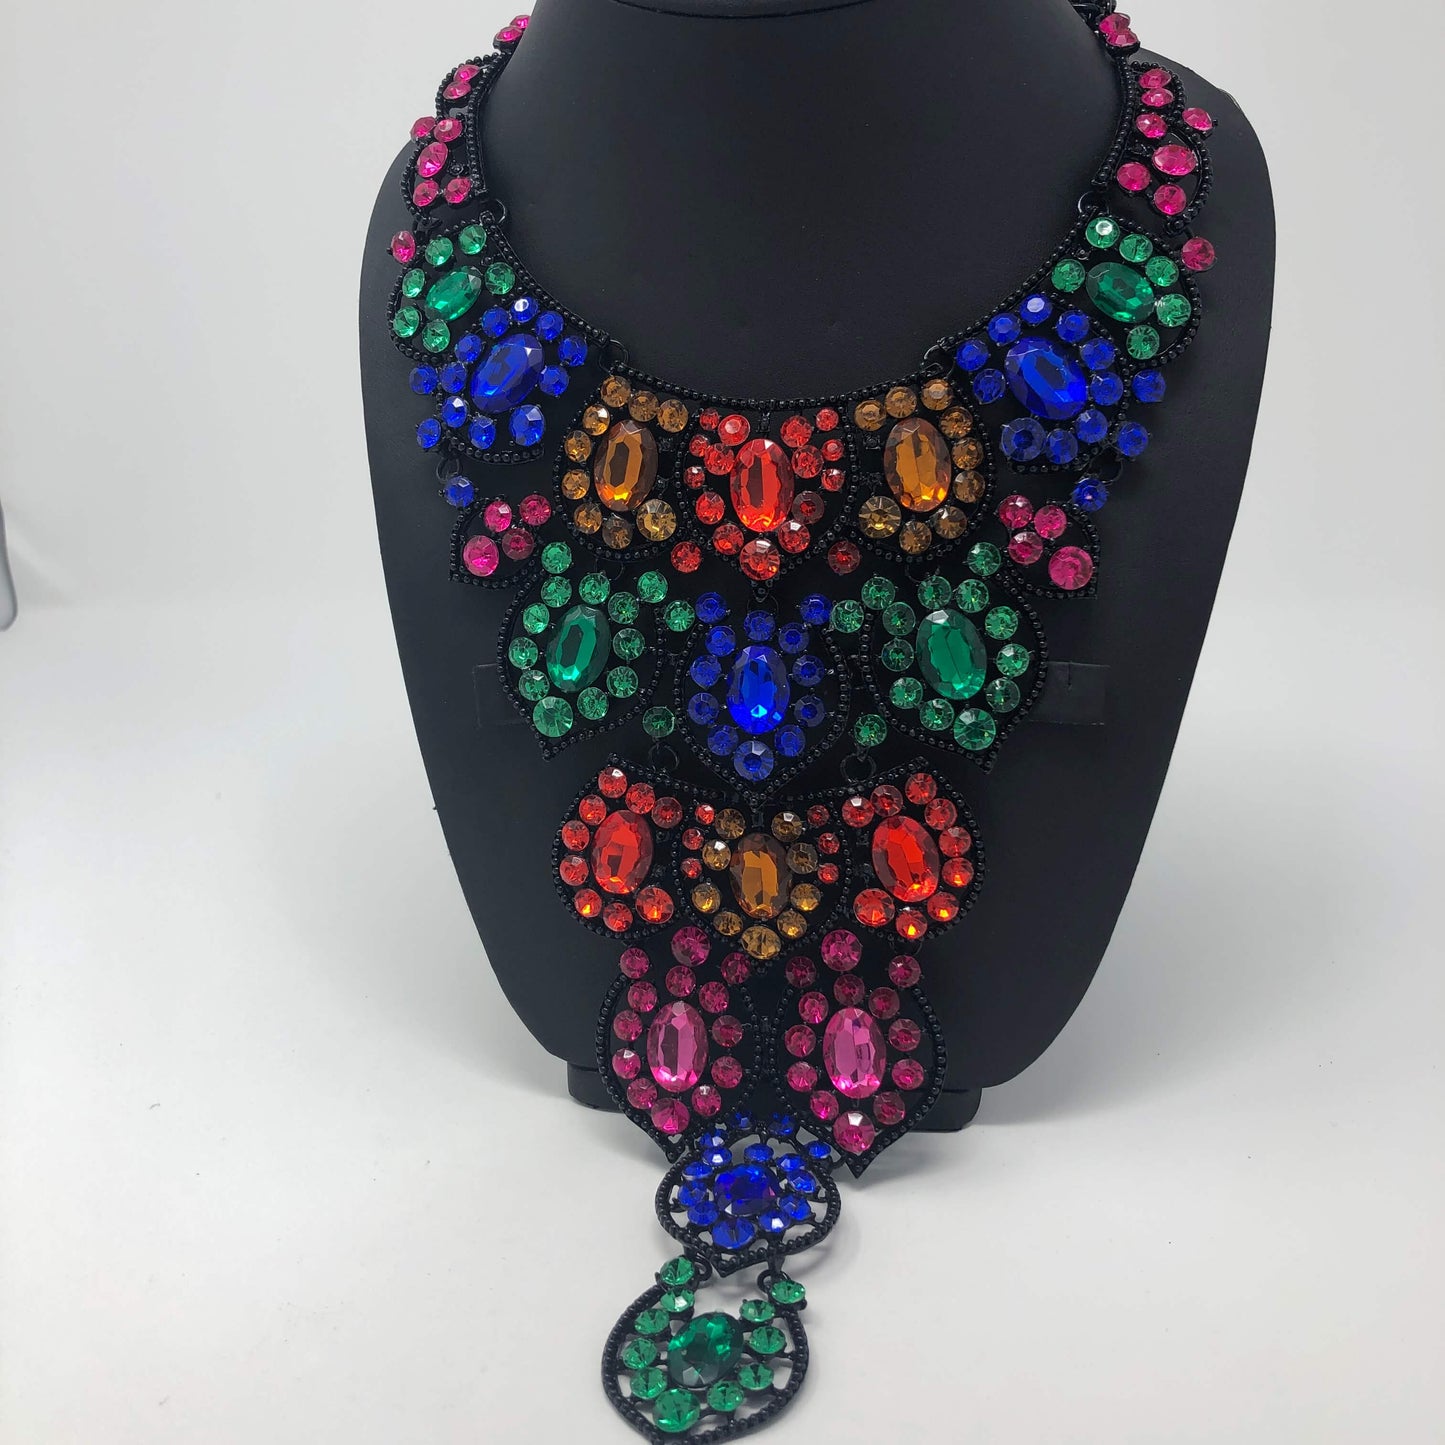 Patterned Necklace - Rofial Beauty